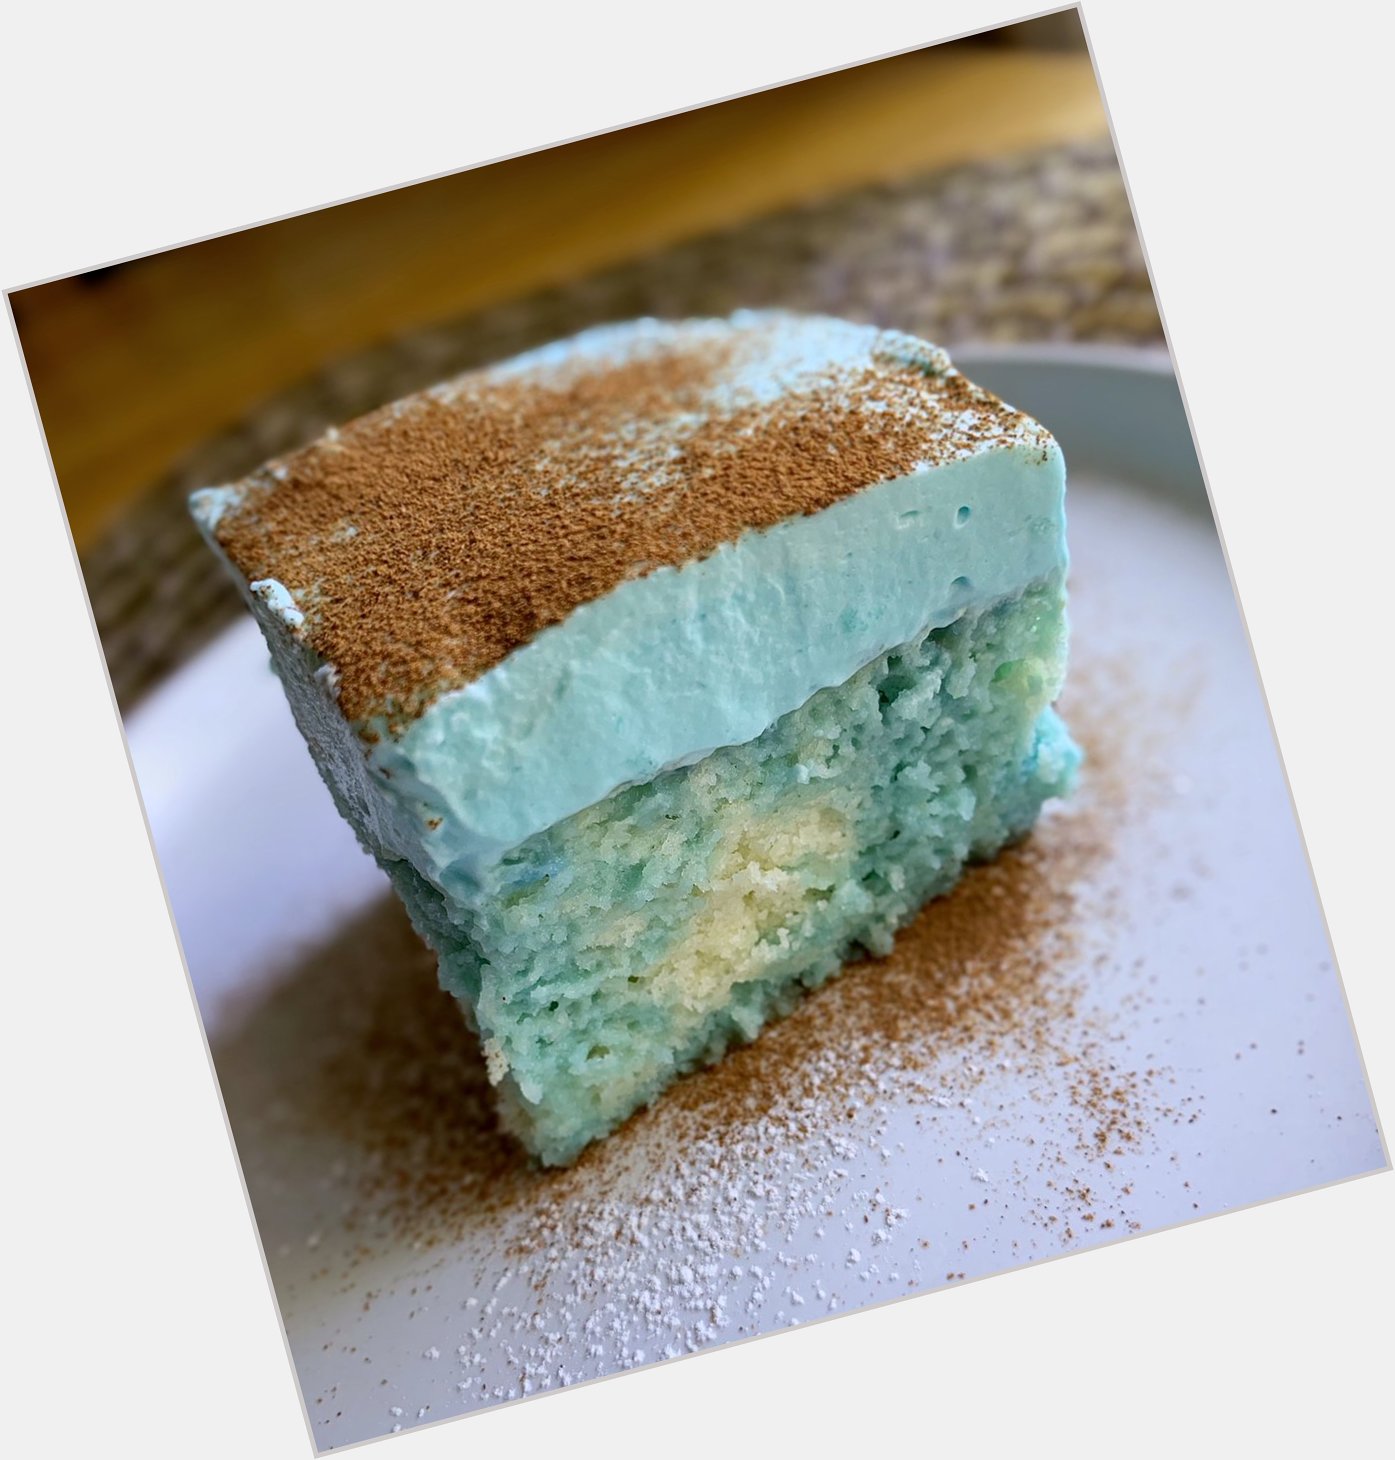    Happy Birthday Dave! Have some Blue Milk Tres Leches cake    